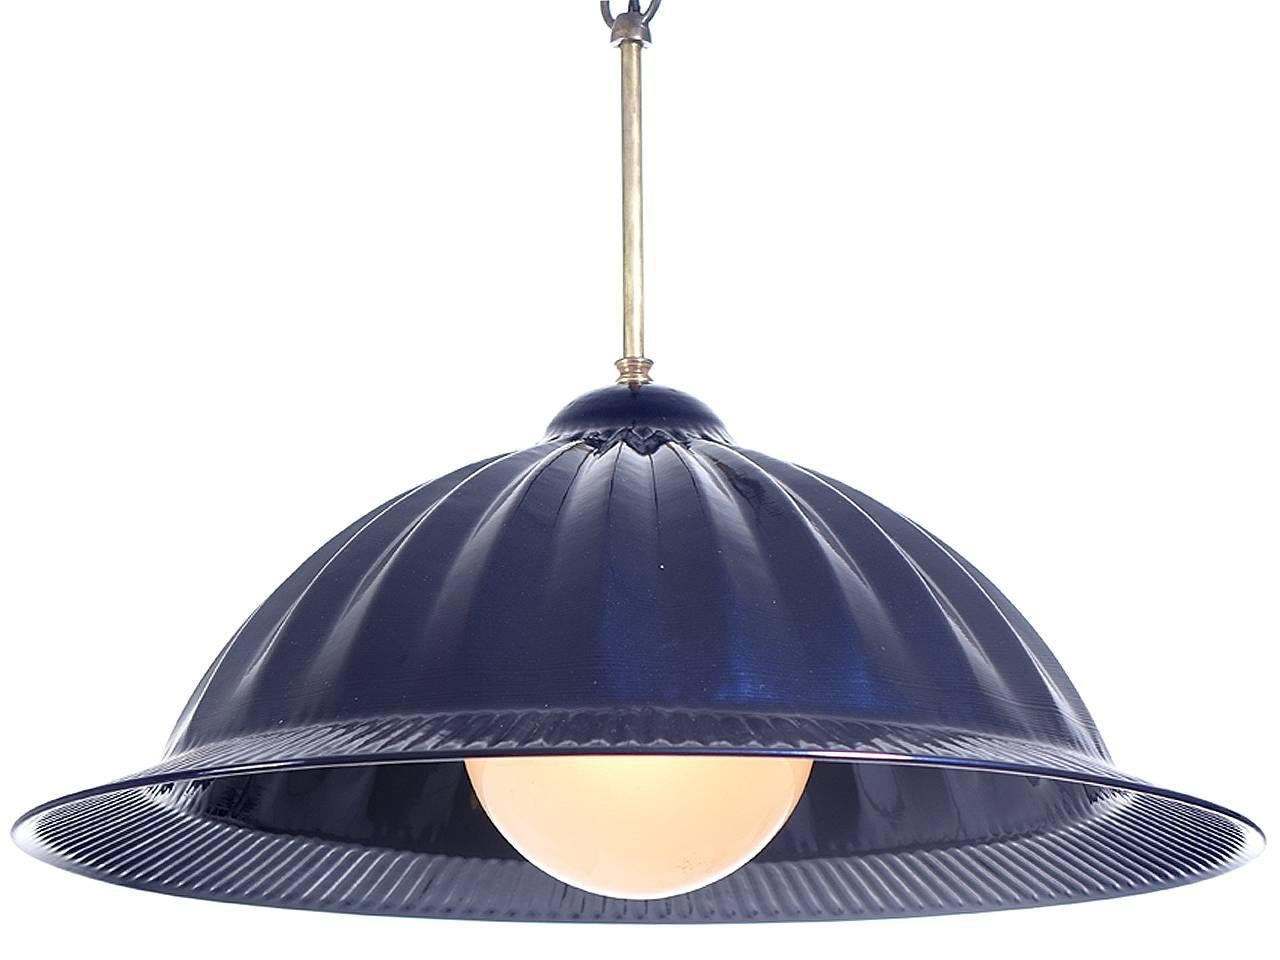 American Large Pleated Cobalt Blue Dome